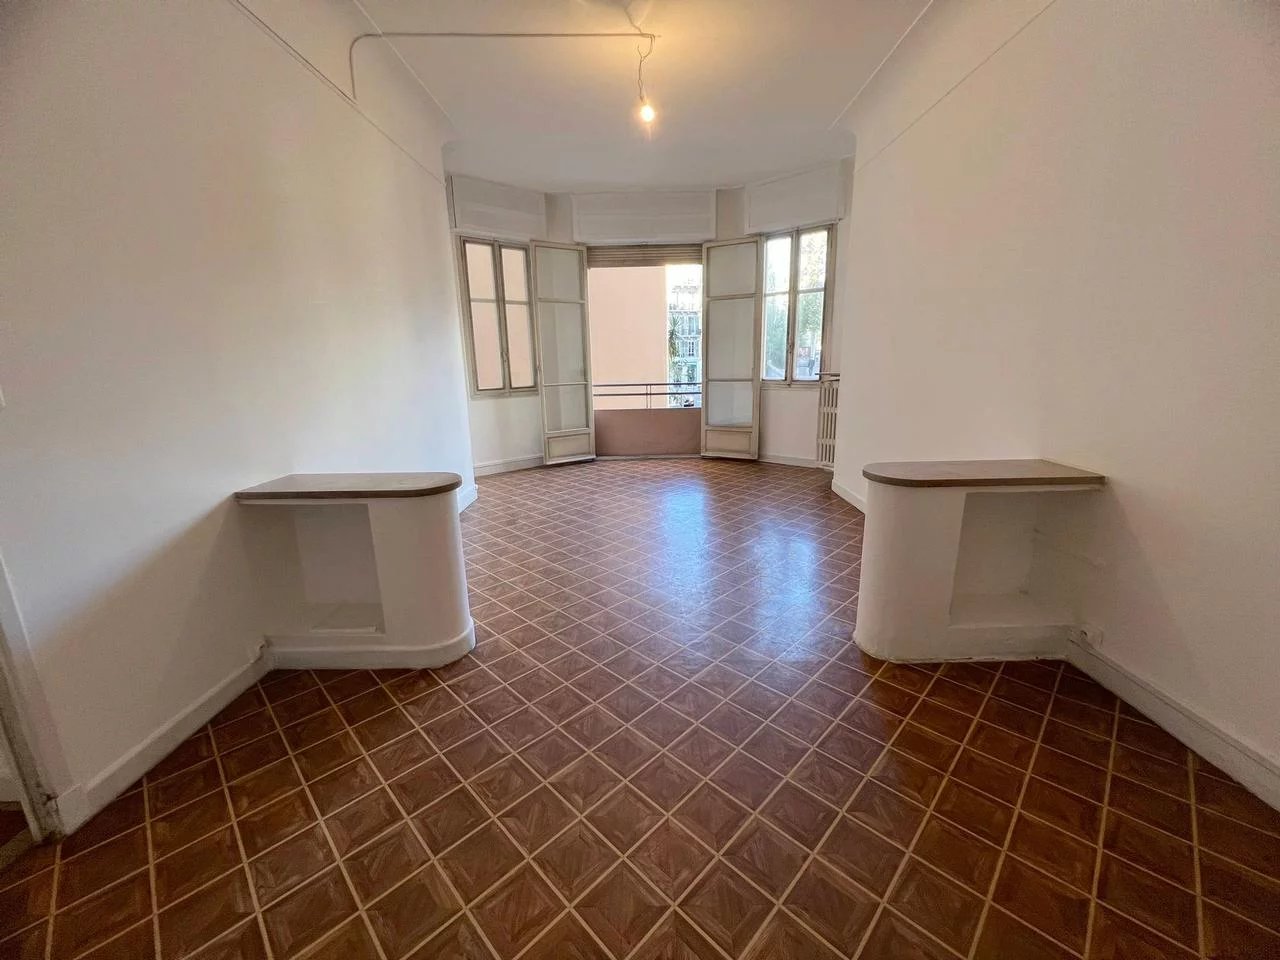 Appartement  2 Rooms 64m2  for sale   269 000 €